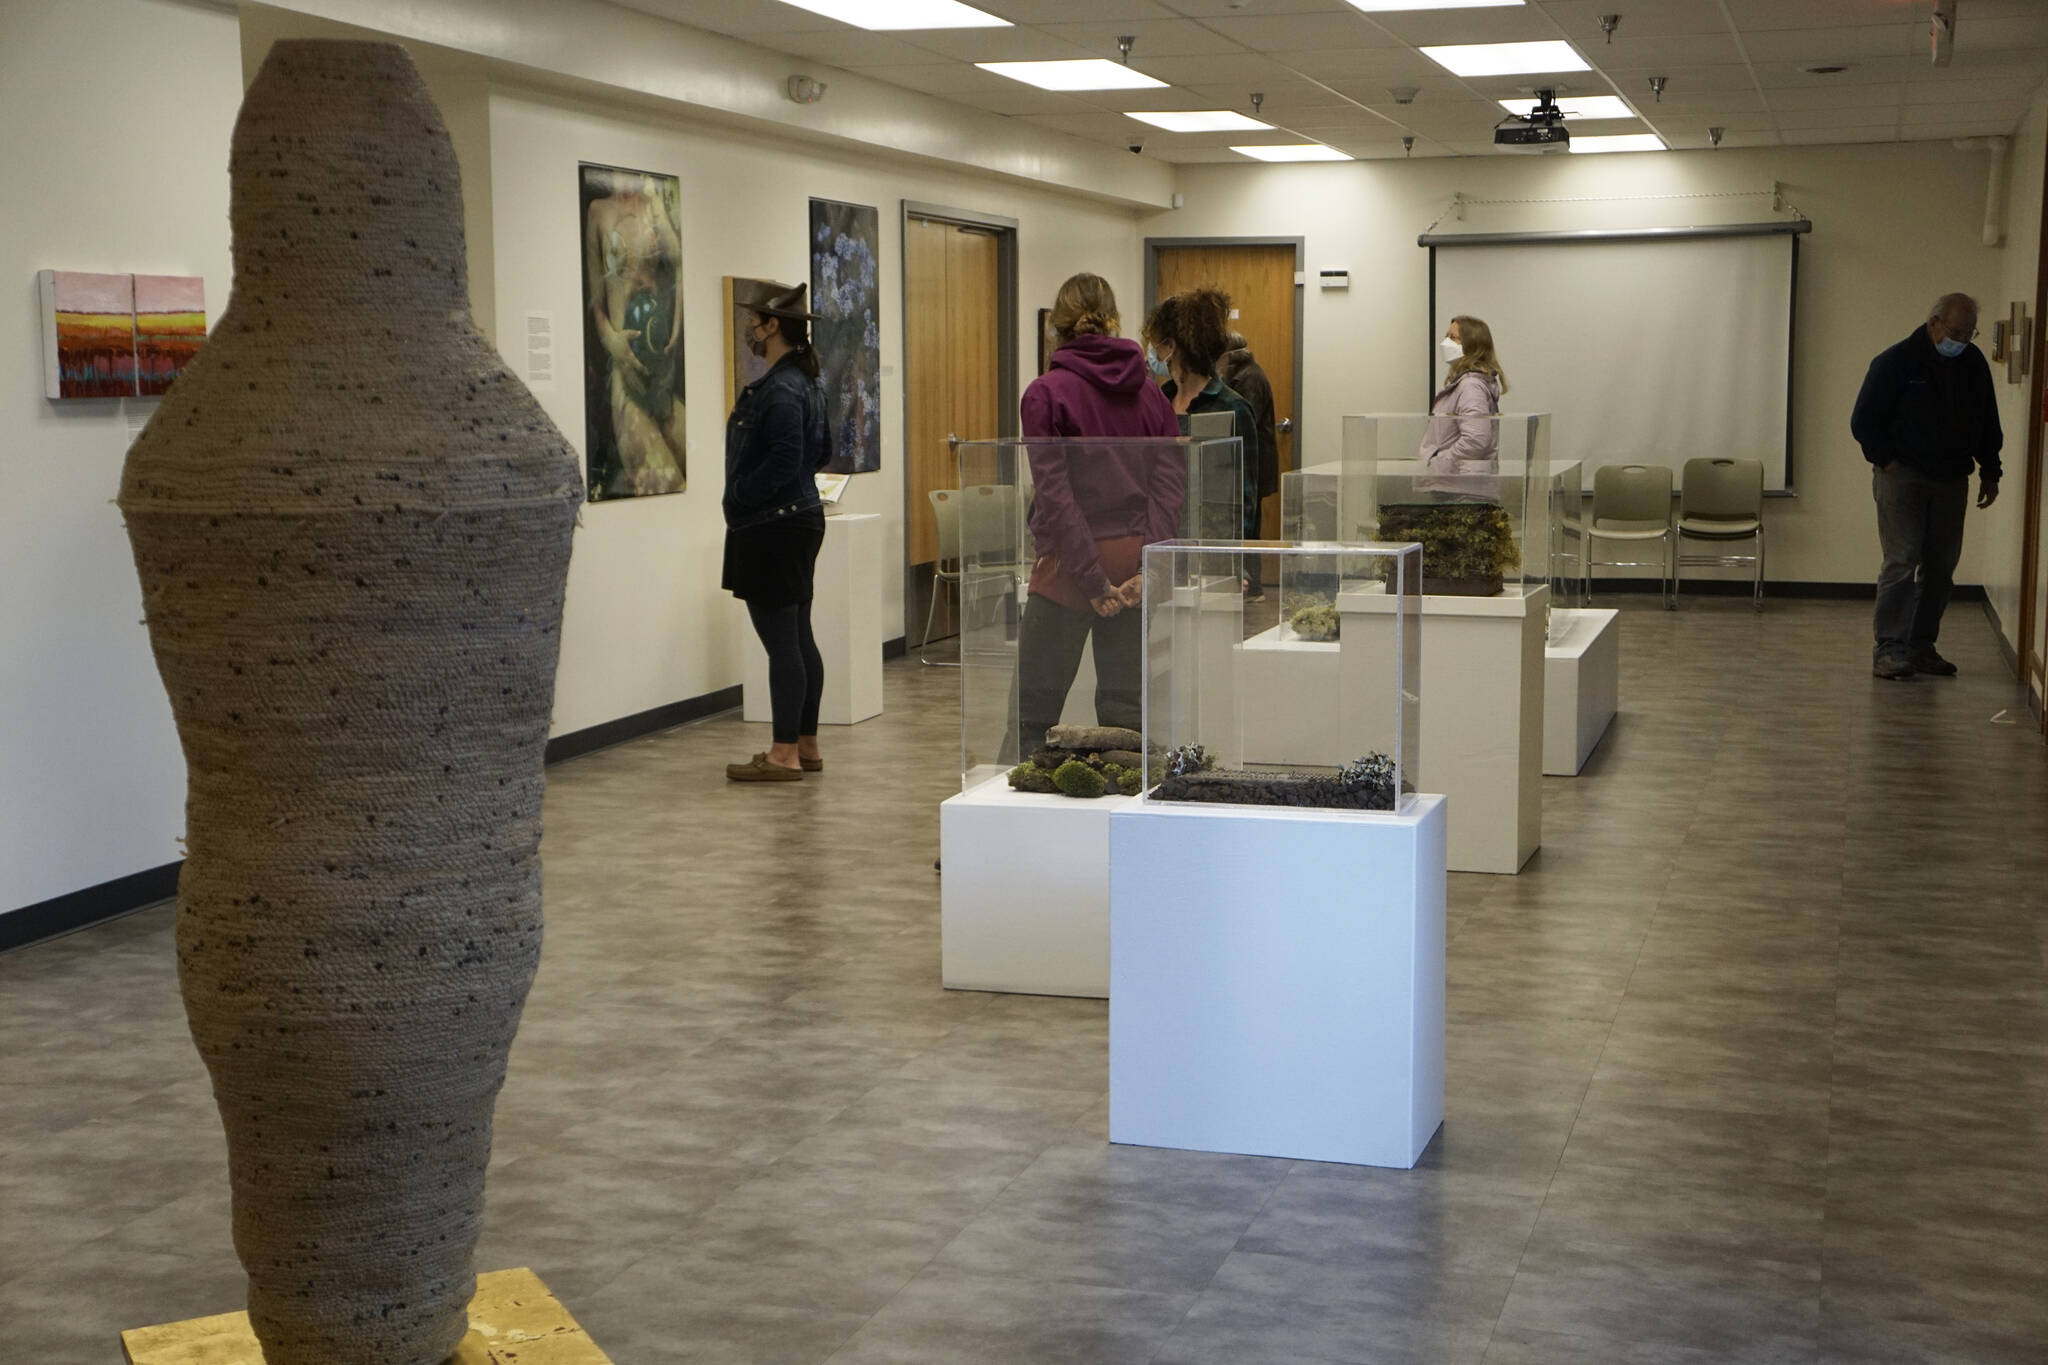 People visit the Homer Drawdown Peatland exhibit last Friday, Sept. 17, 2021, at a reception and talk at the Pratt Museum & Park in Homer, Alaska. At left is Sheryl Maree Reily’s “Sarcophagus.” (Photo by Michael Armstrong/Homer News)